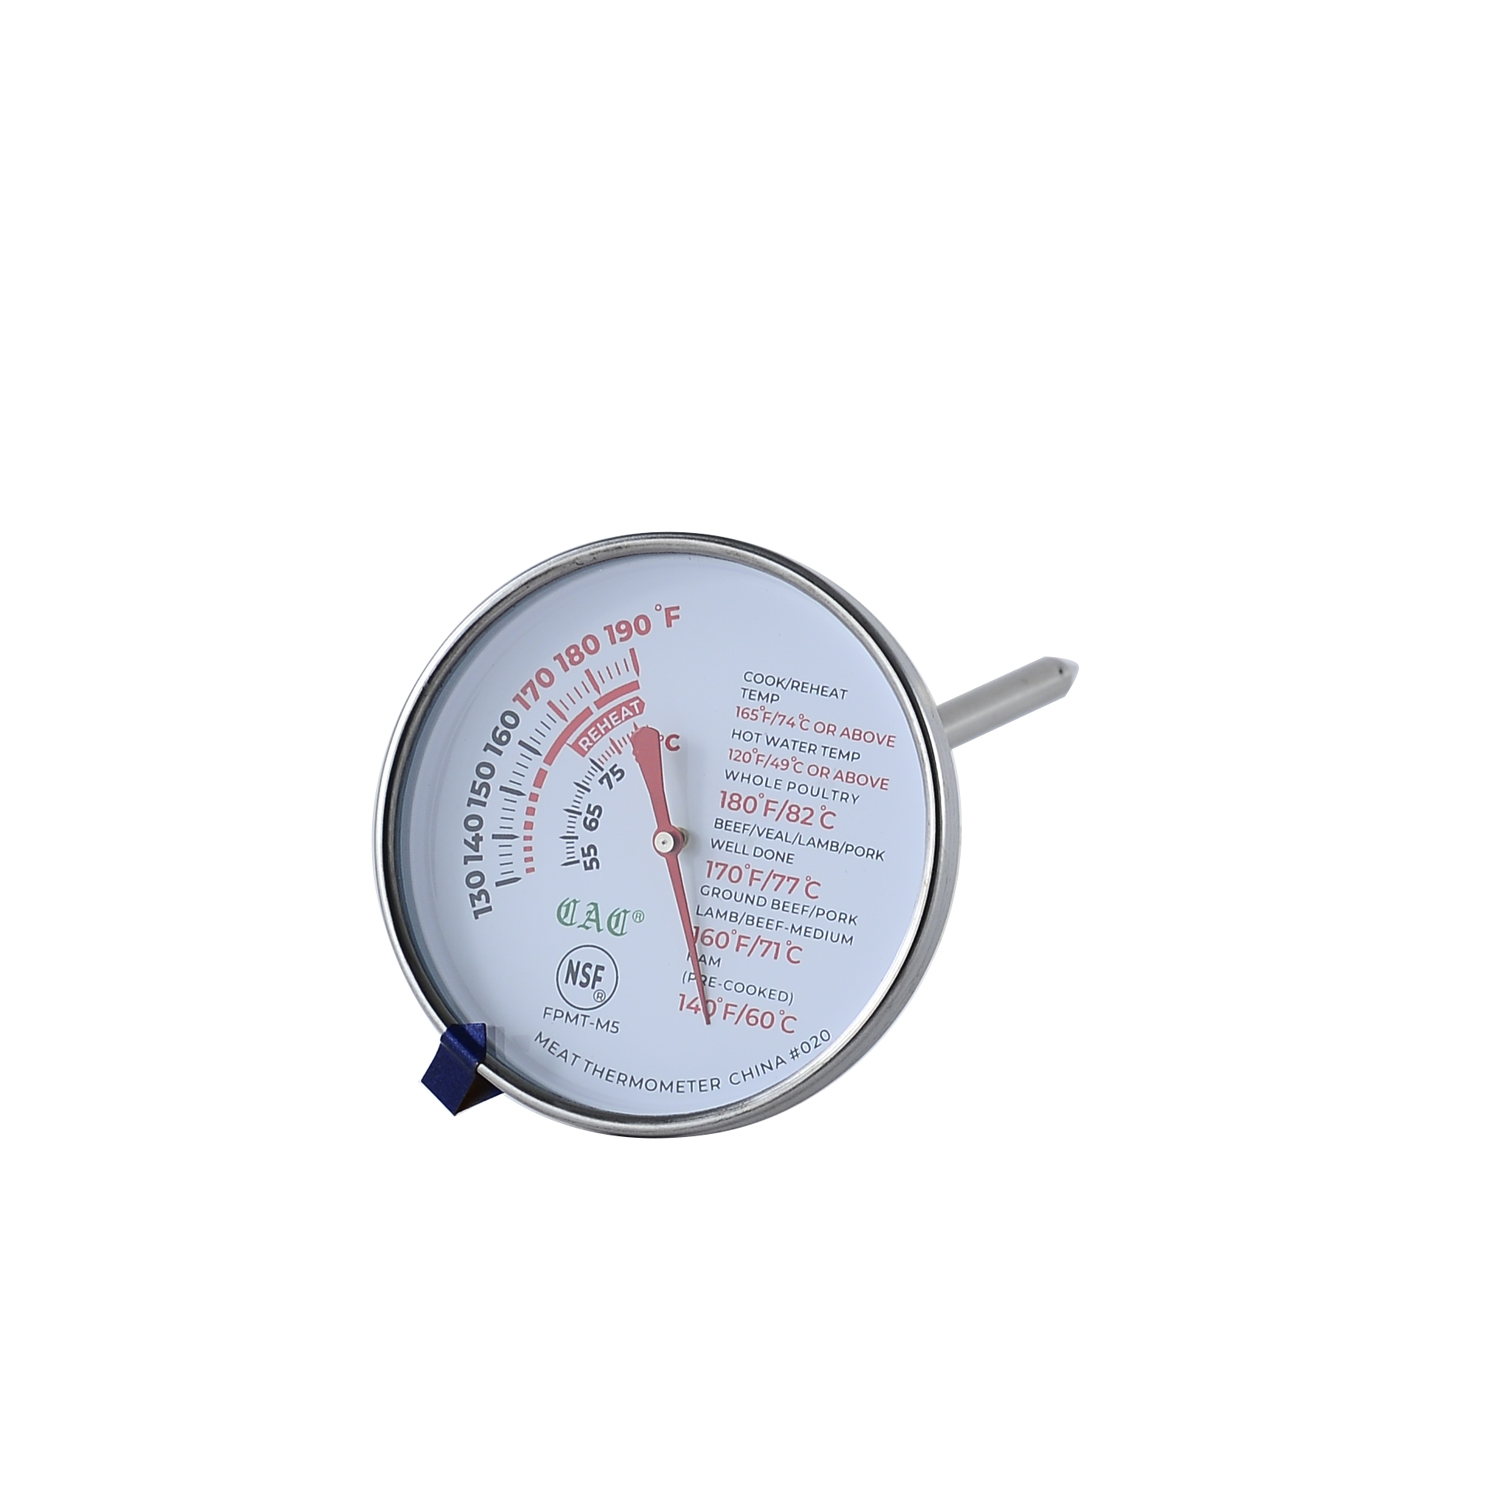 CAC China FPMT-M5 Equil Thermo Meat Thermometer, 3"Dia